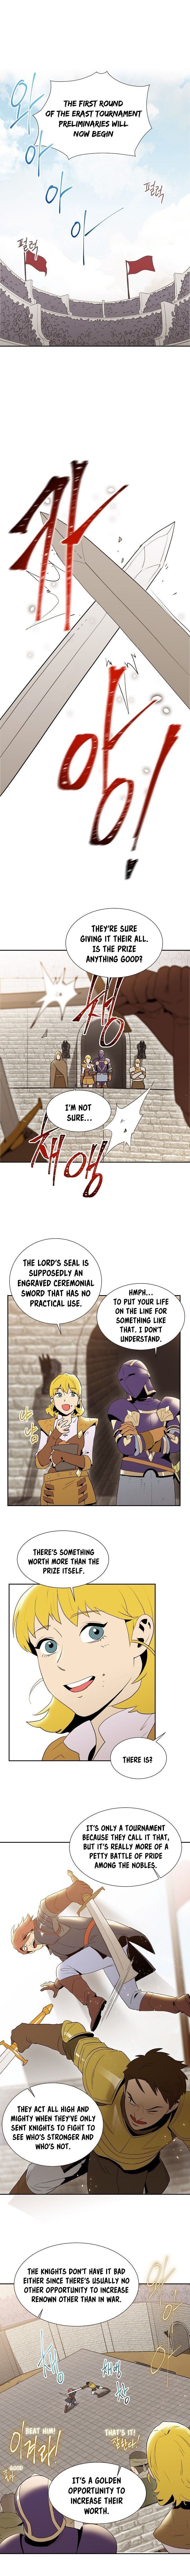 The Skeleton Soldier Failed to Defend the Dungeon [Official] chapter 0.025